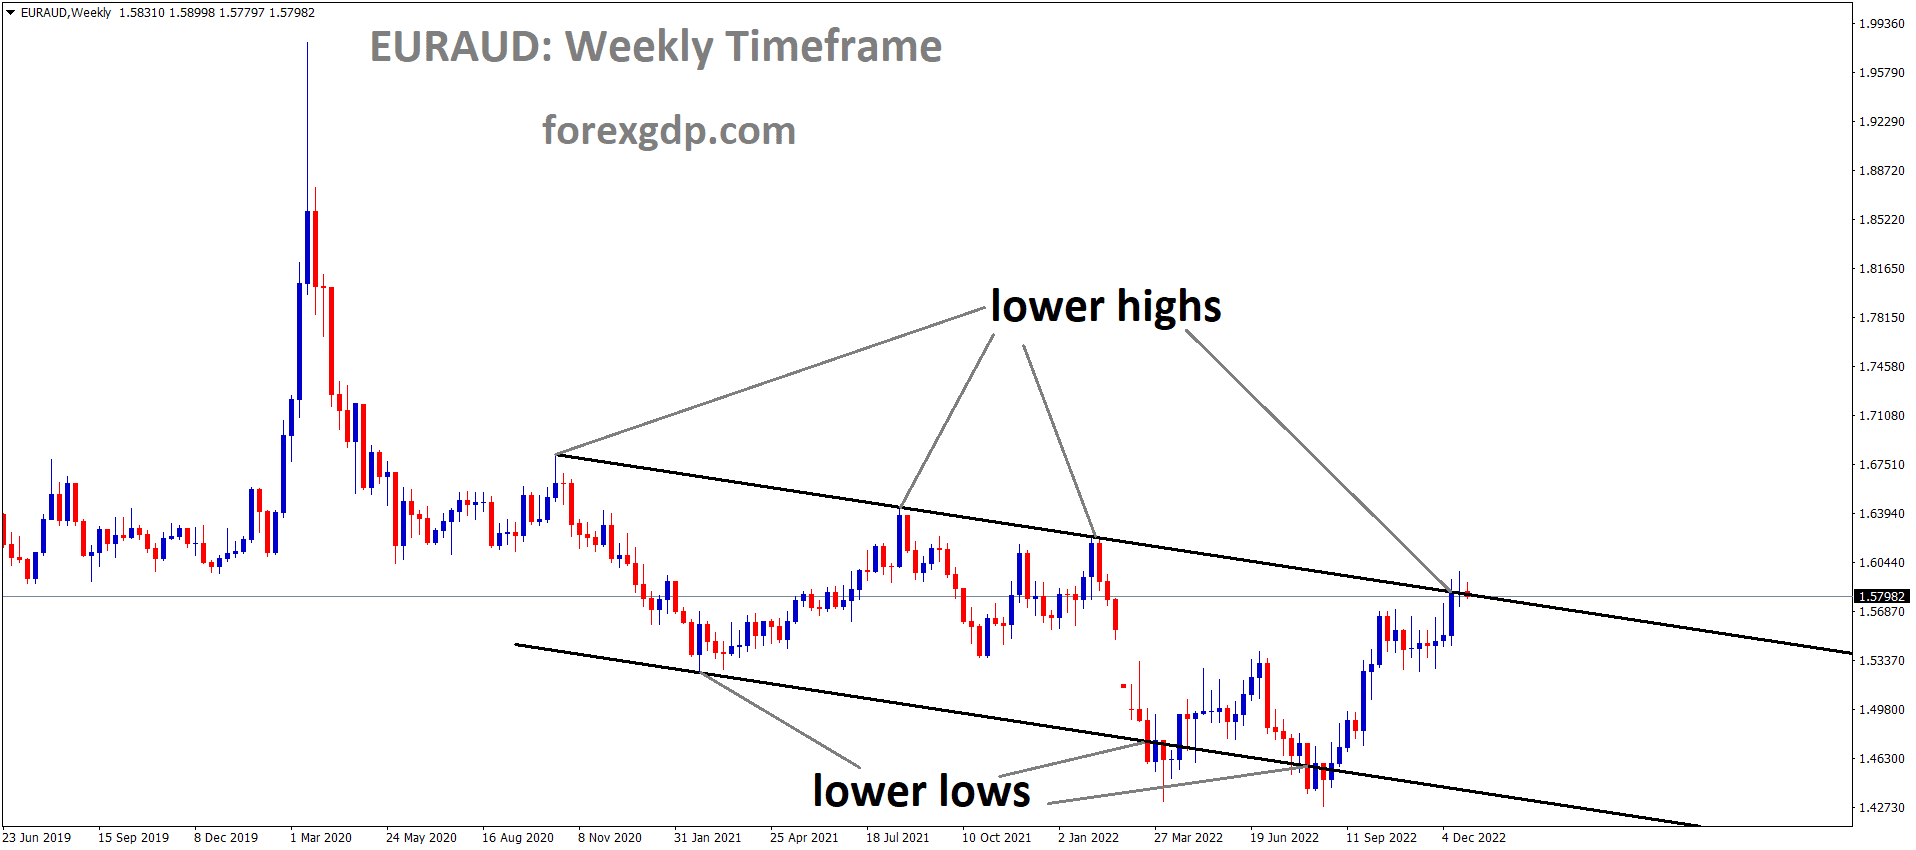 EURAUD is moving in the Descending channel and the market has reached the lower high area of the channel